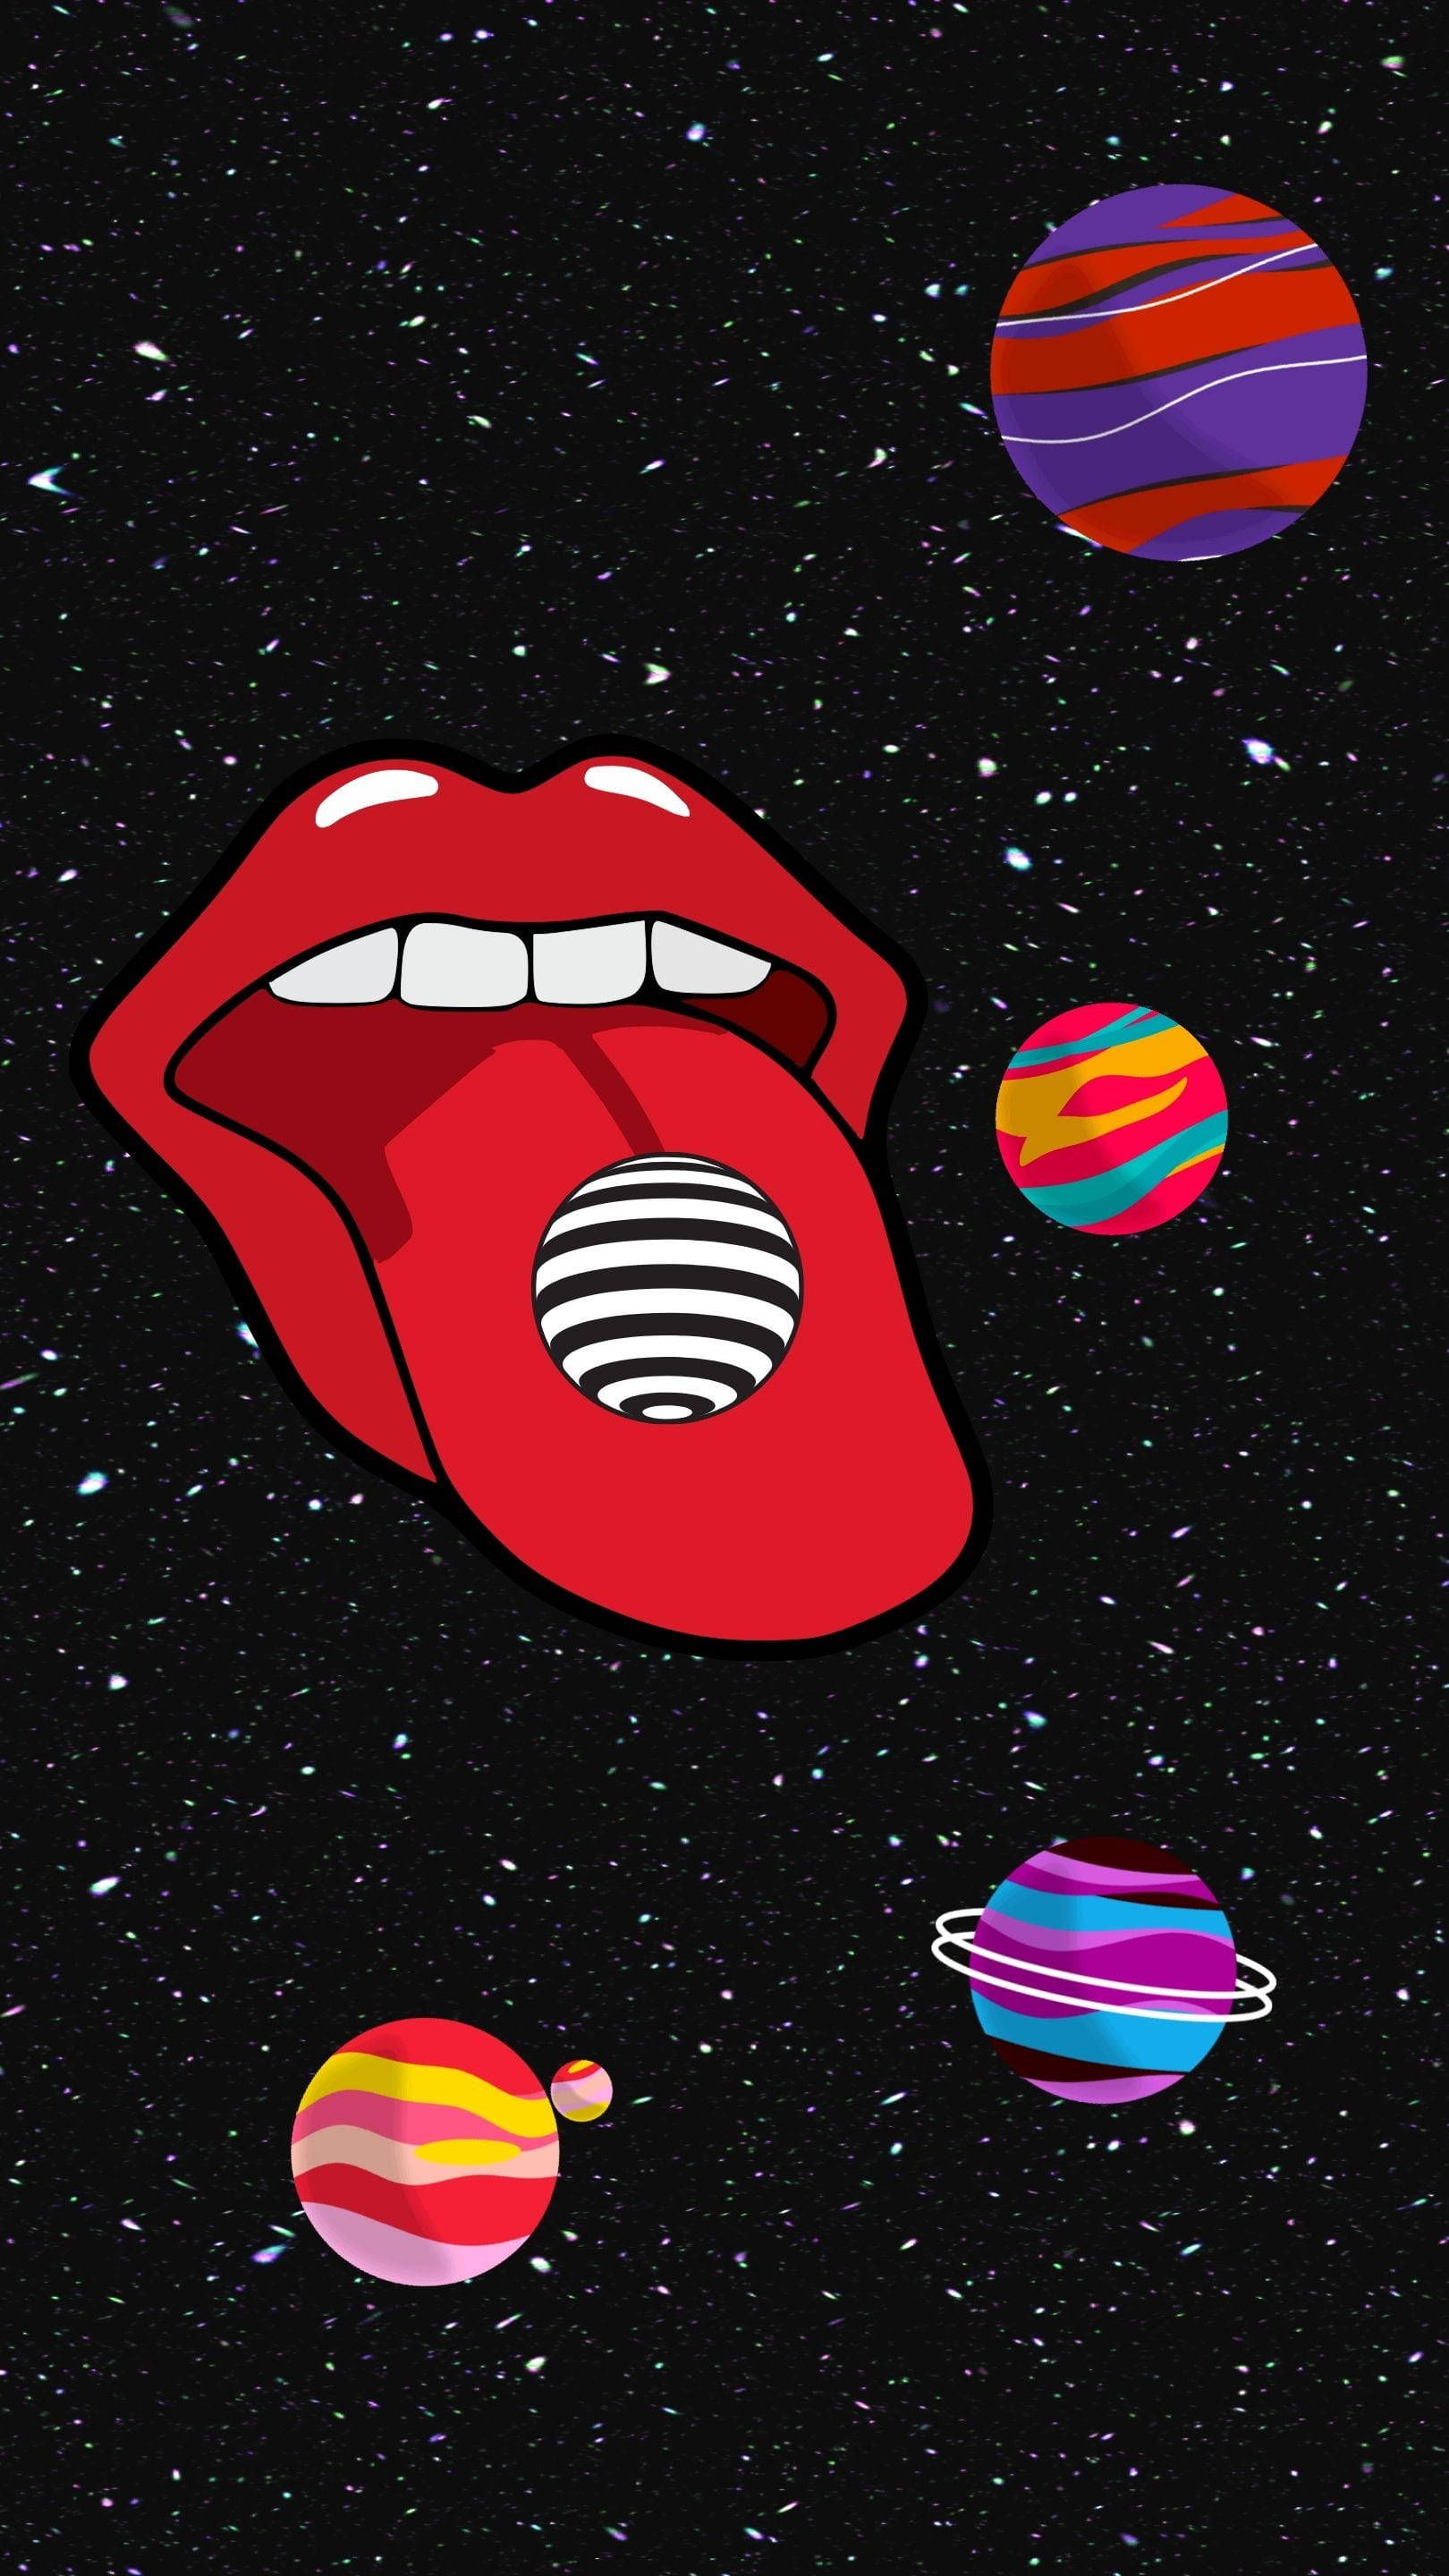 Aesthetic phone wallpaper of a tongue licking its lips against a black background with colorful planets - Retro, alien, science, trippy, lips